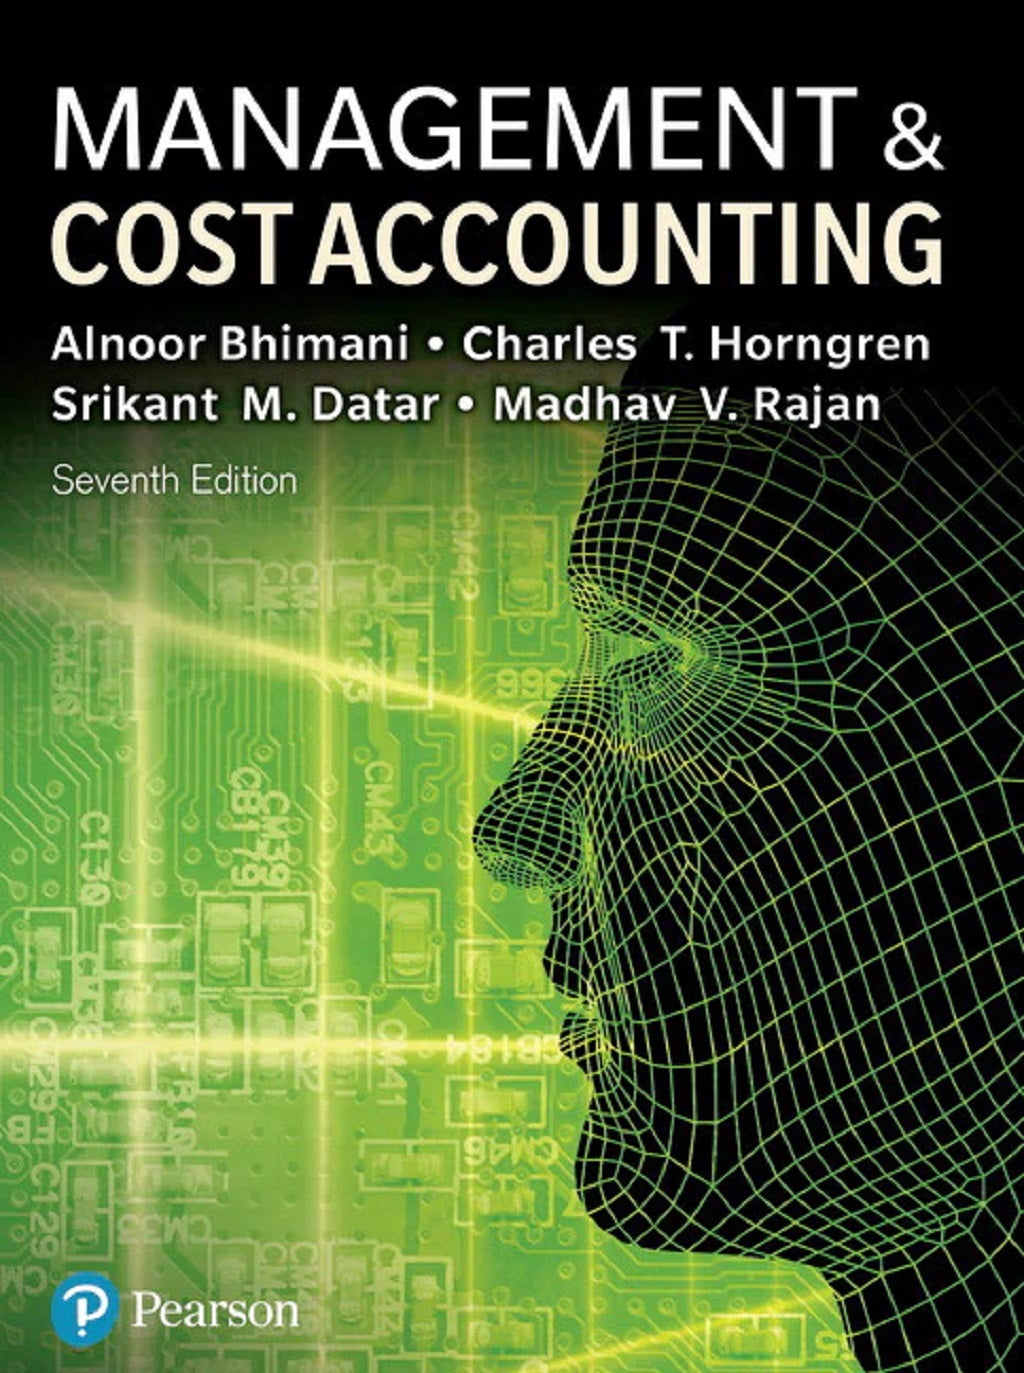 Management & Cost Accounting, 7th Edition